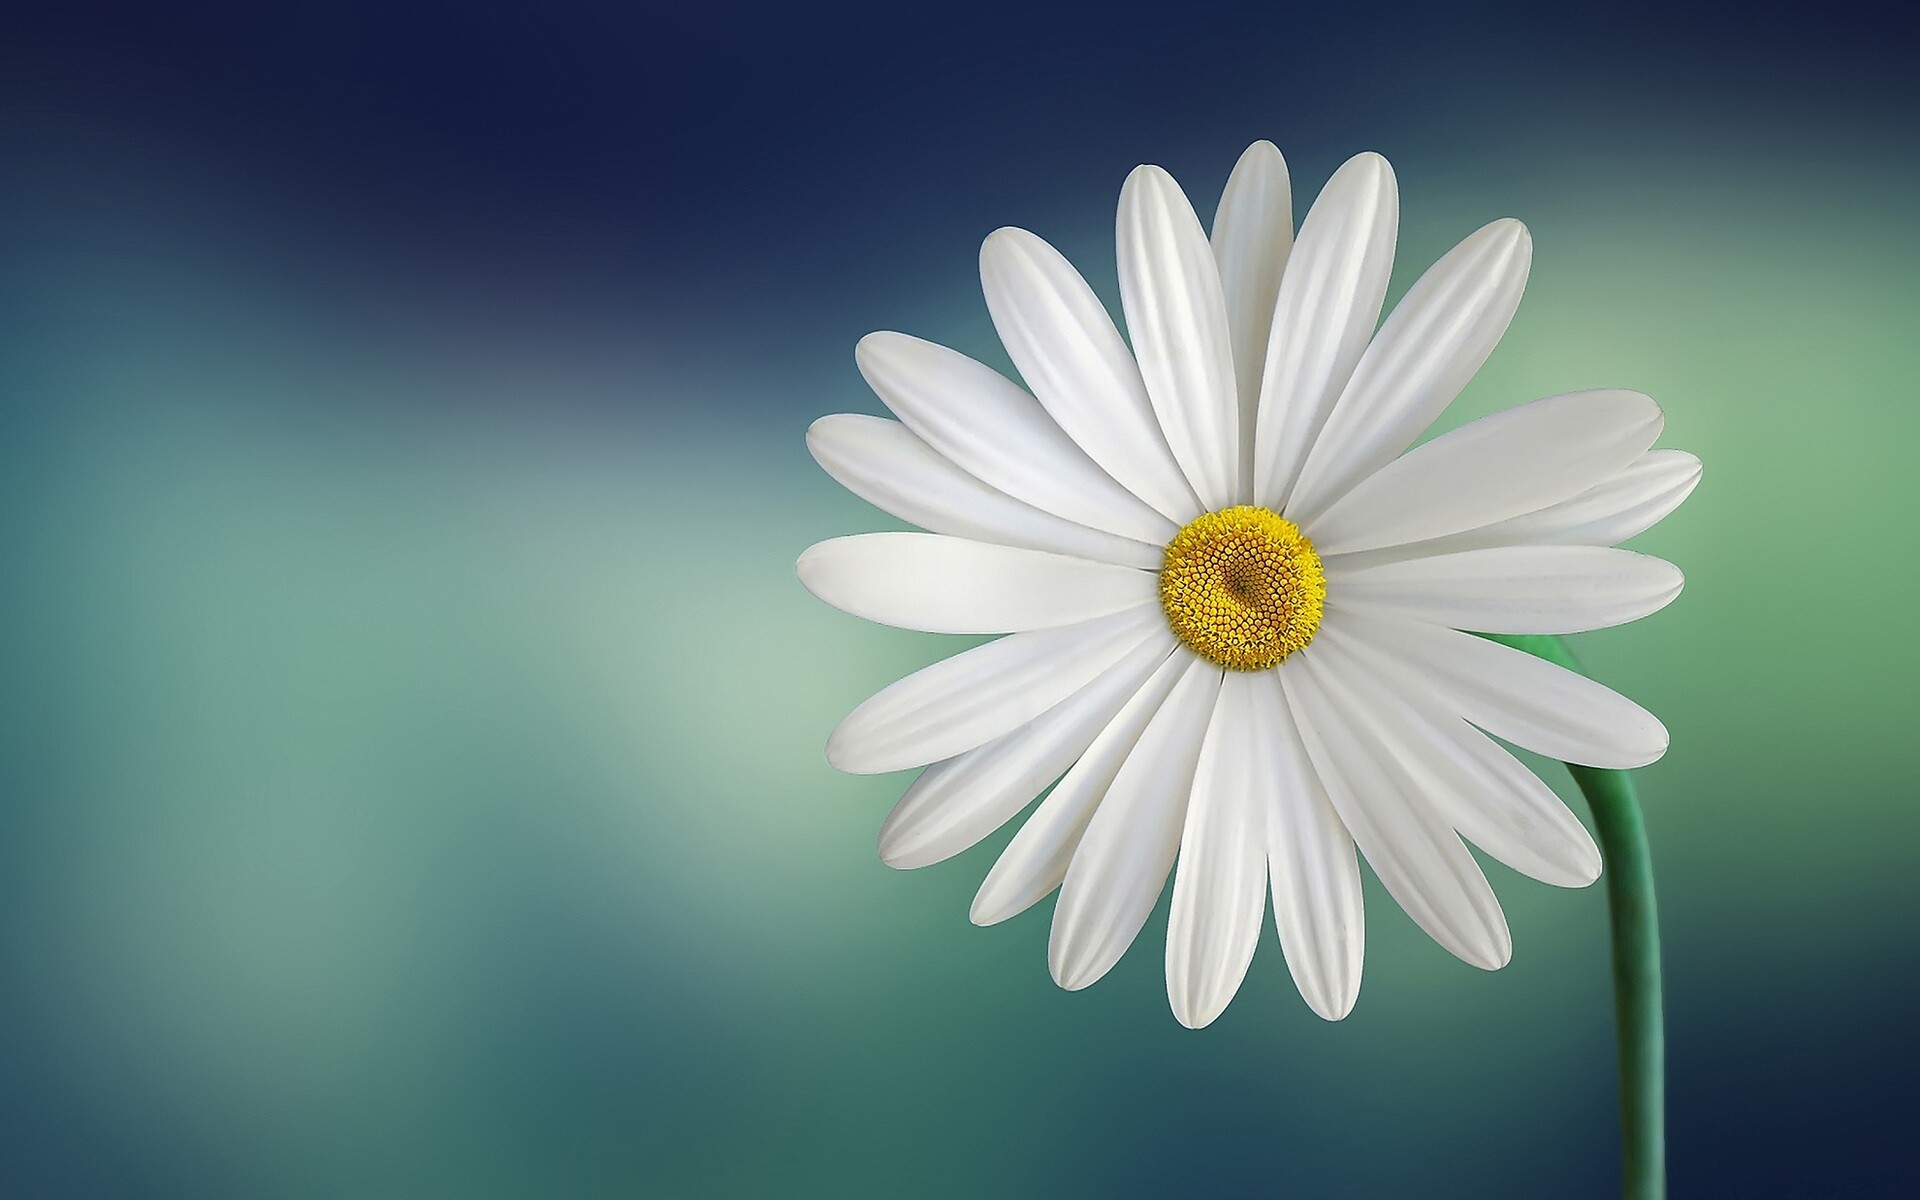 Daisy: As a flower, daisies symbolize innocence, purity, loyalty, patience, and simplicity. 1920x1200 HD Wallpaper.